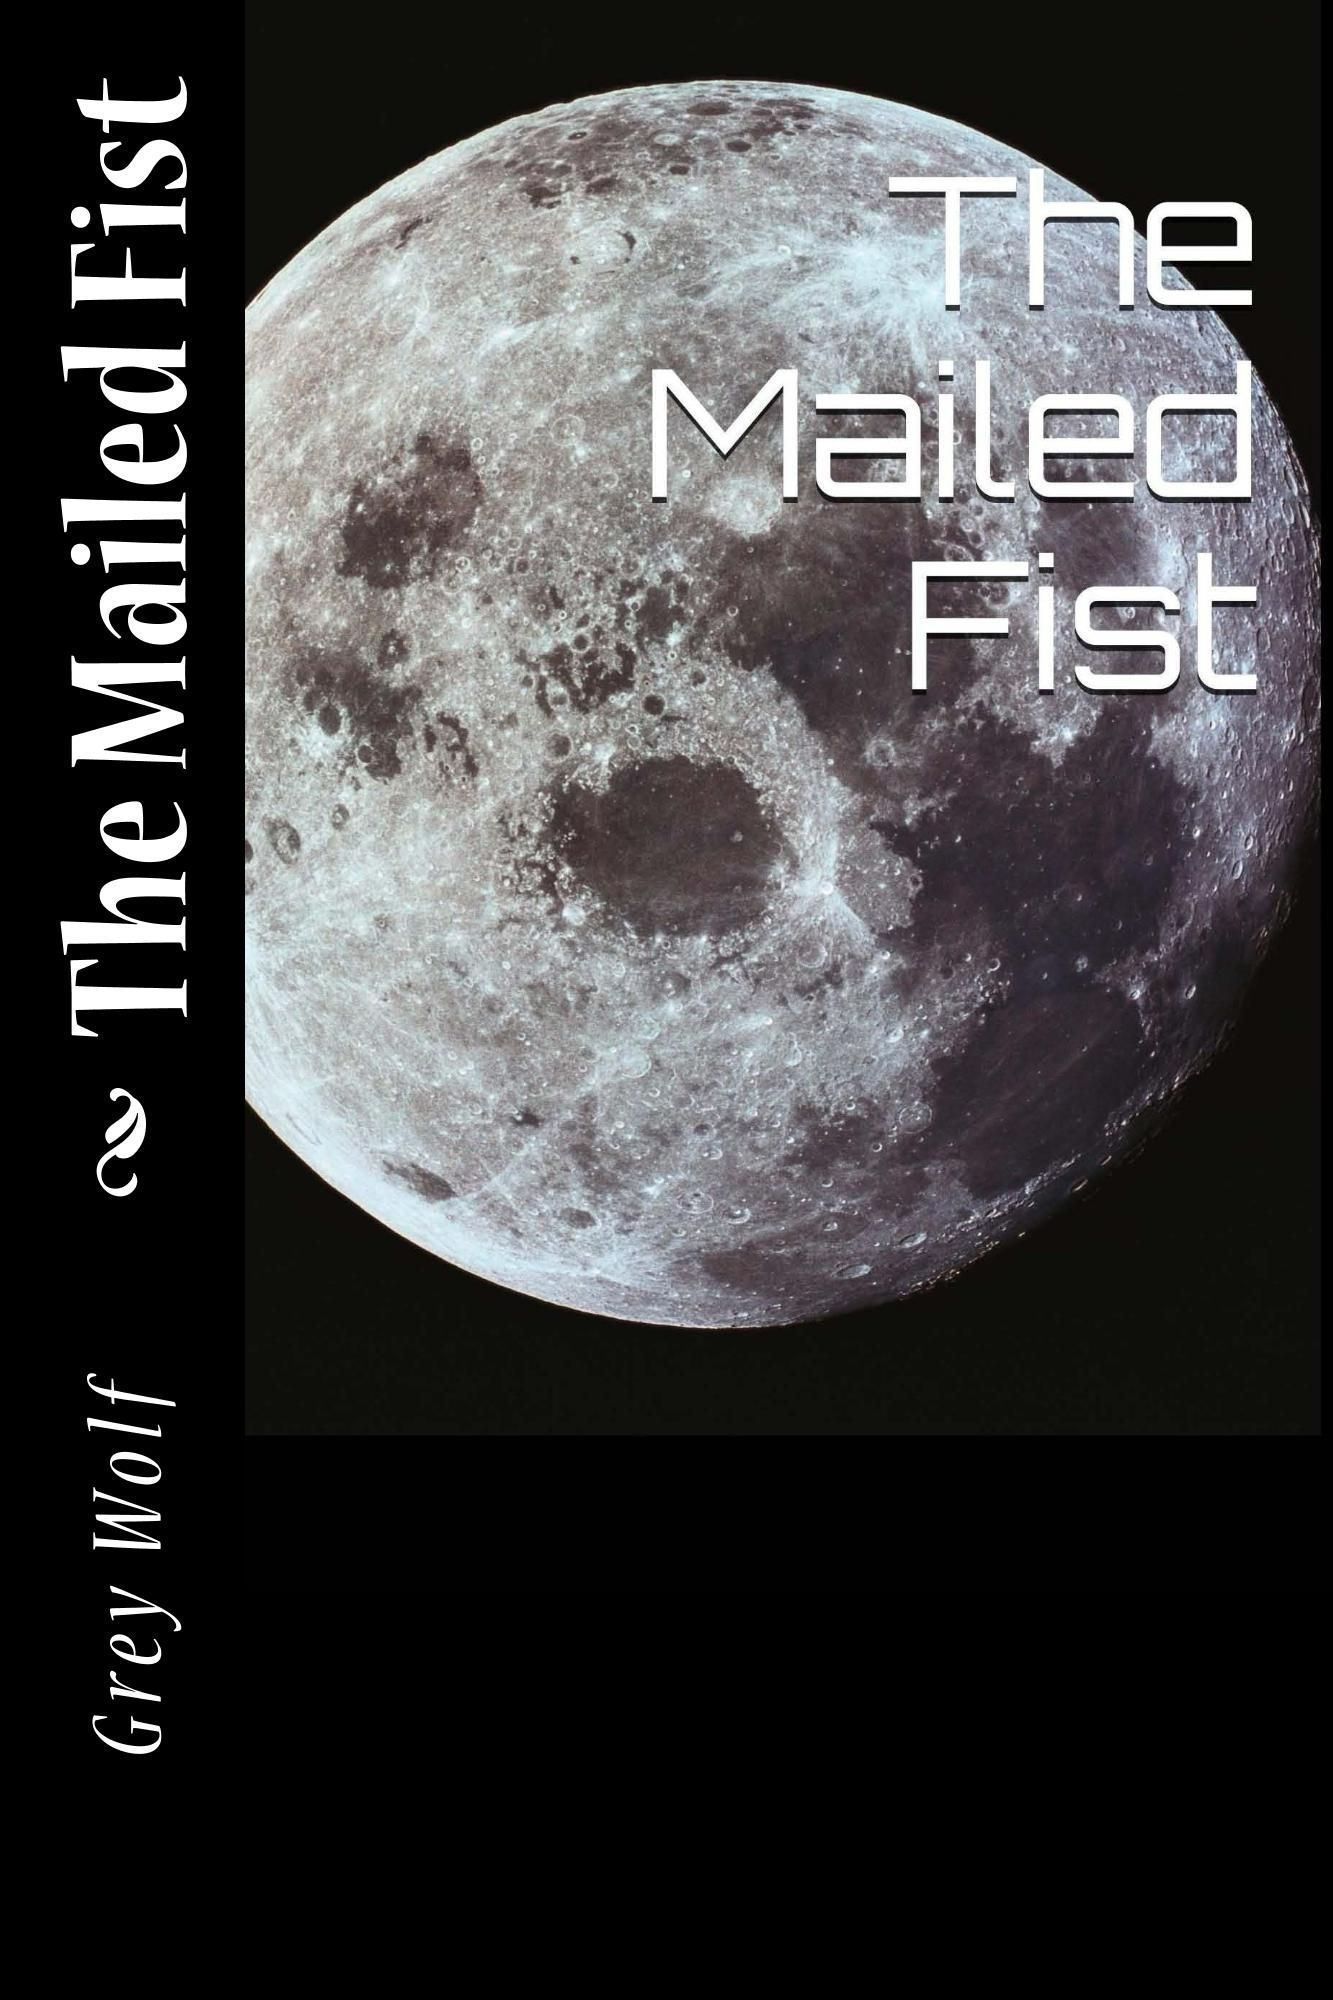 The Mailed Fist by Grey Wolf